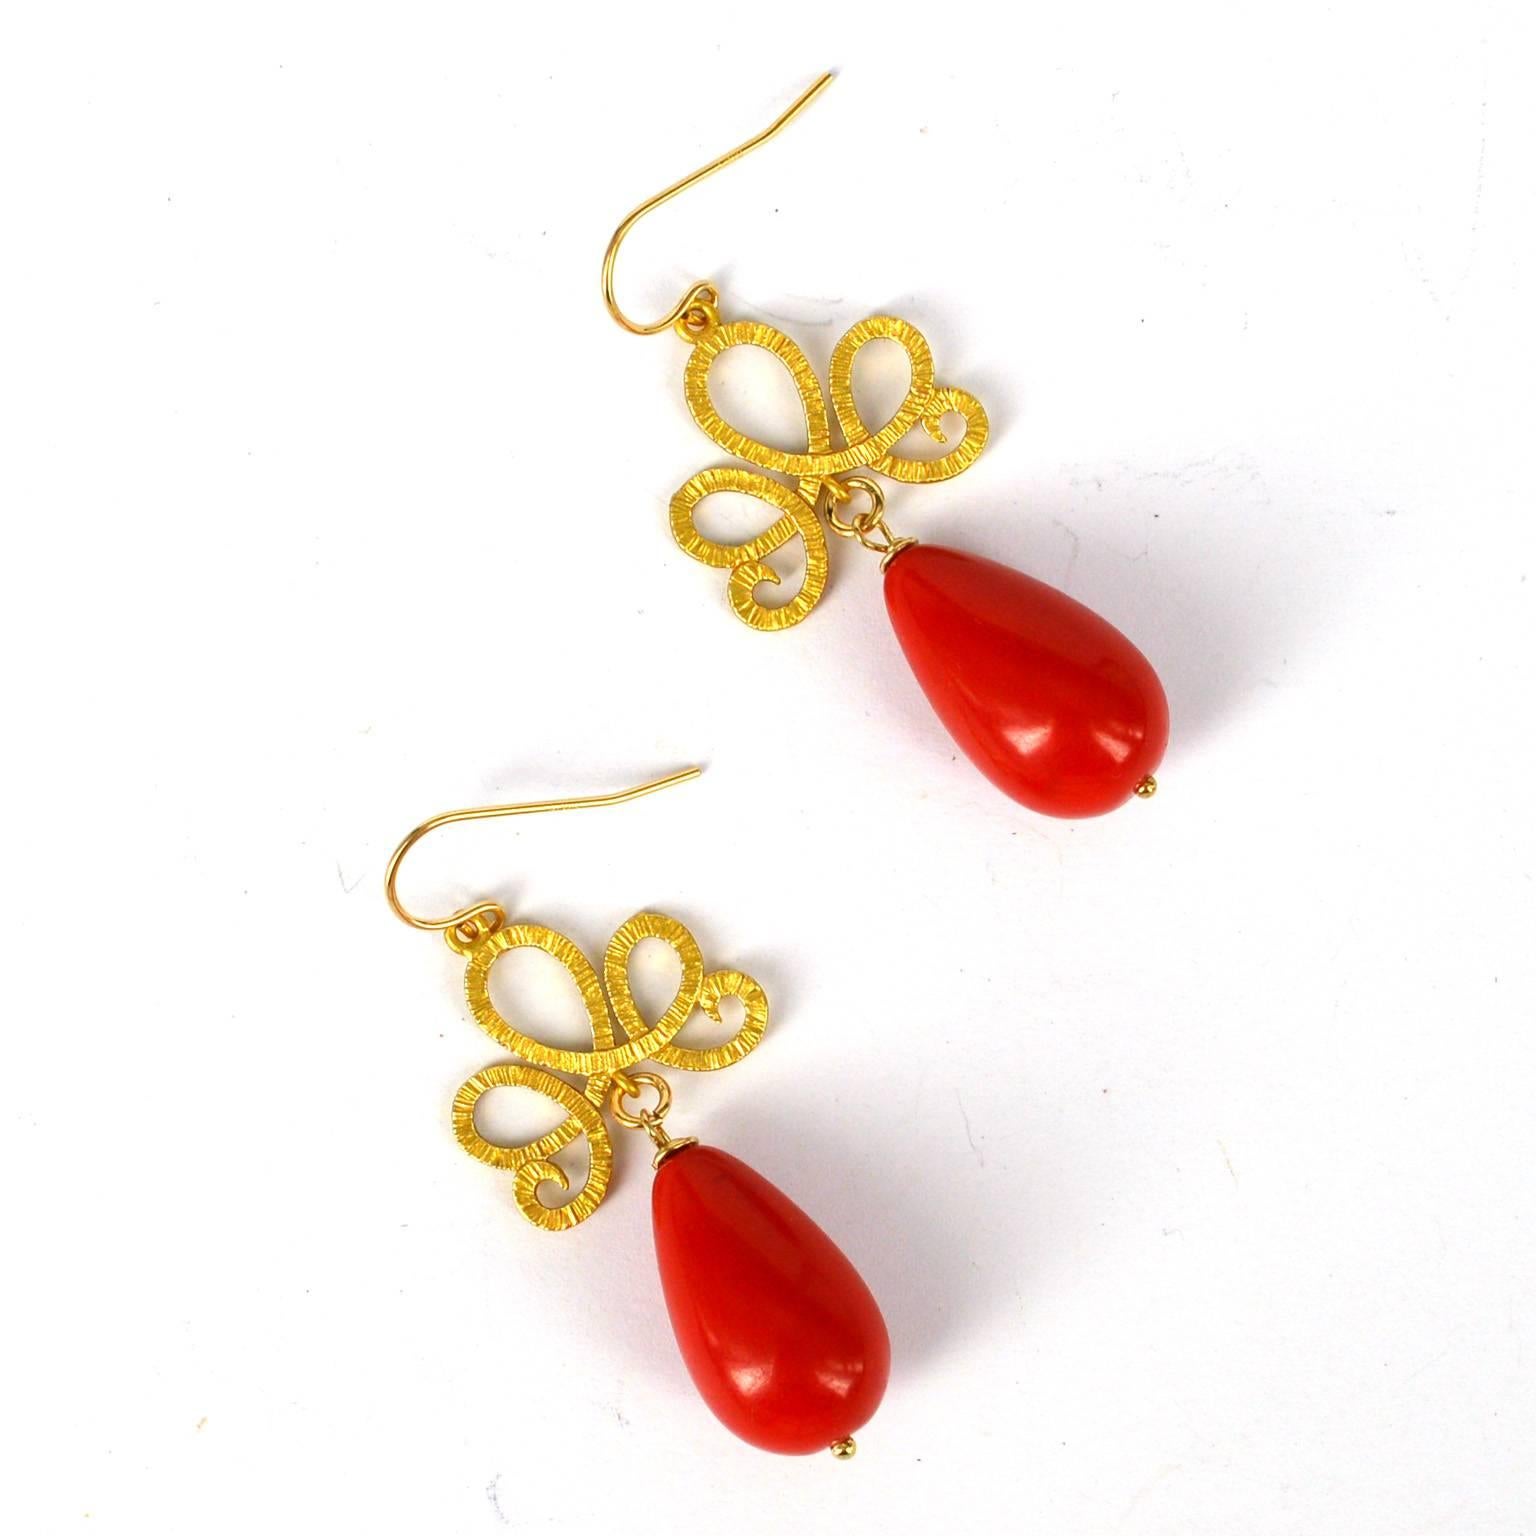 14k gold filled sheppard with 16k gold plated scroll connector and 12x20mm red resin tear drop.
50mm dangle earring